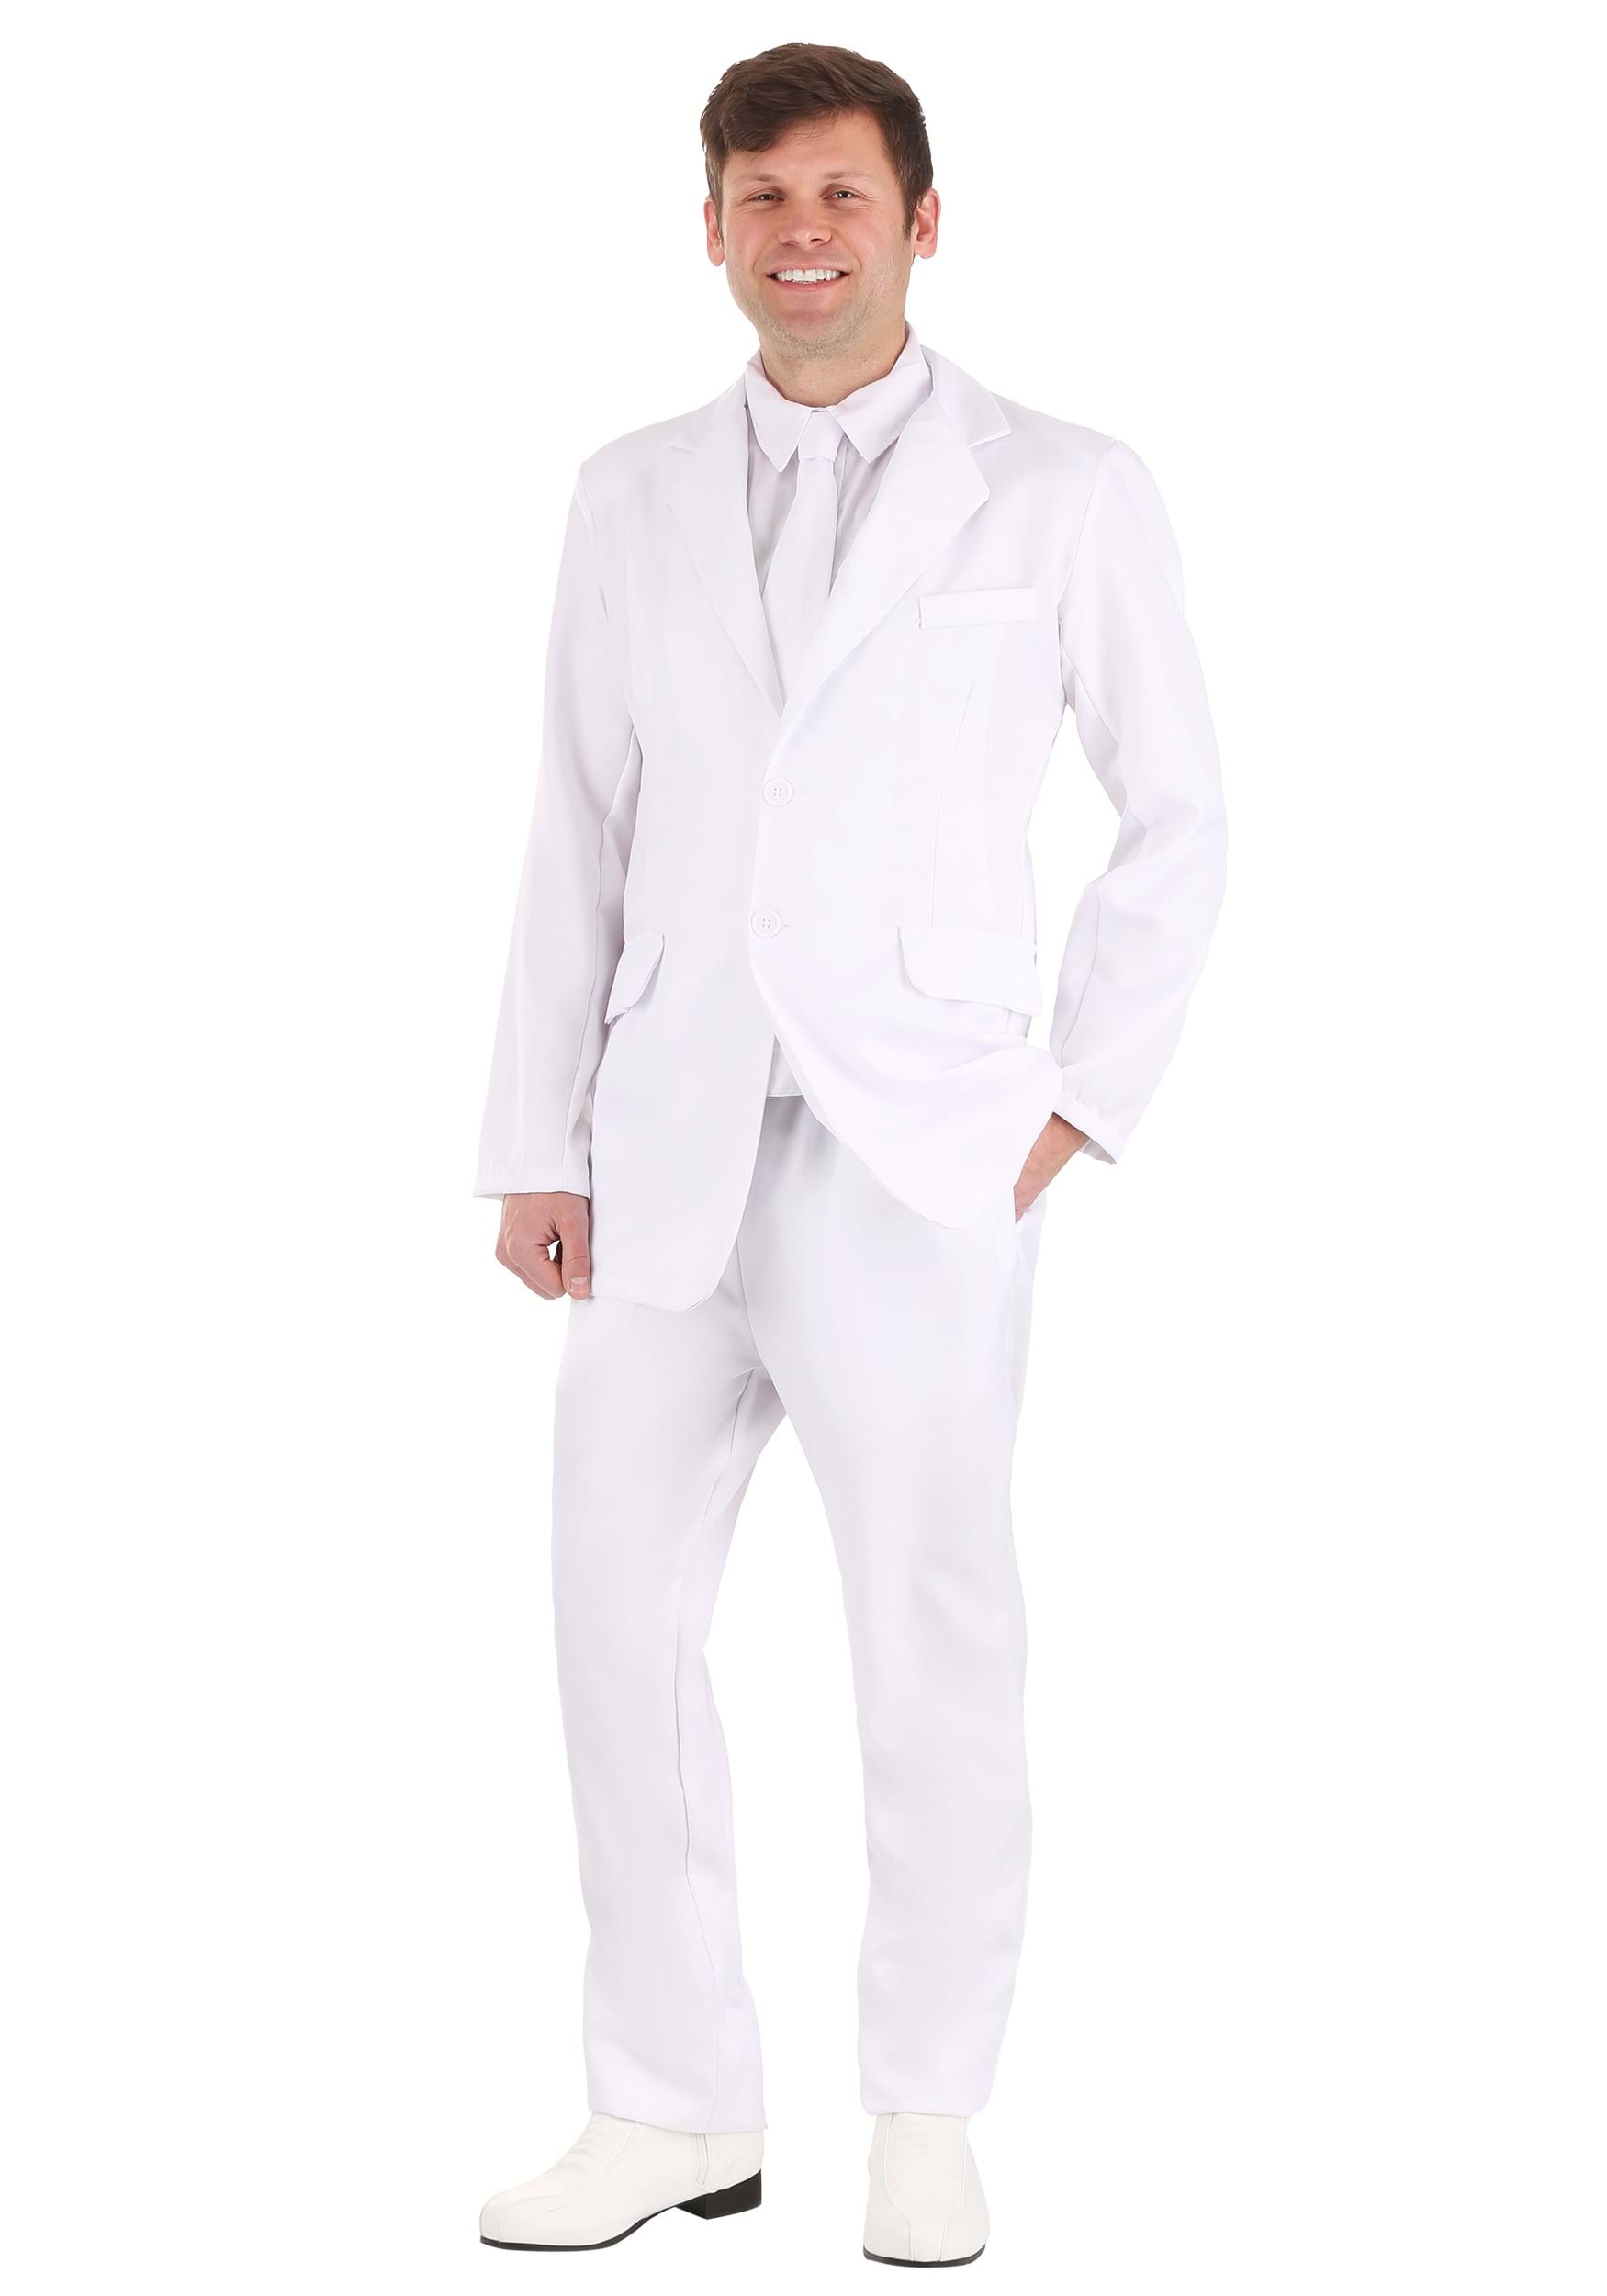 Details more than 152 white suit for men latest